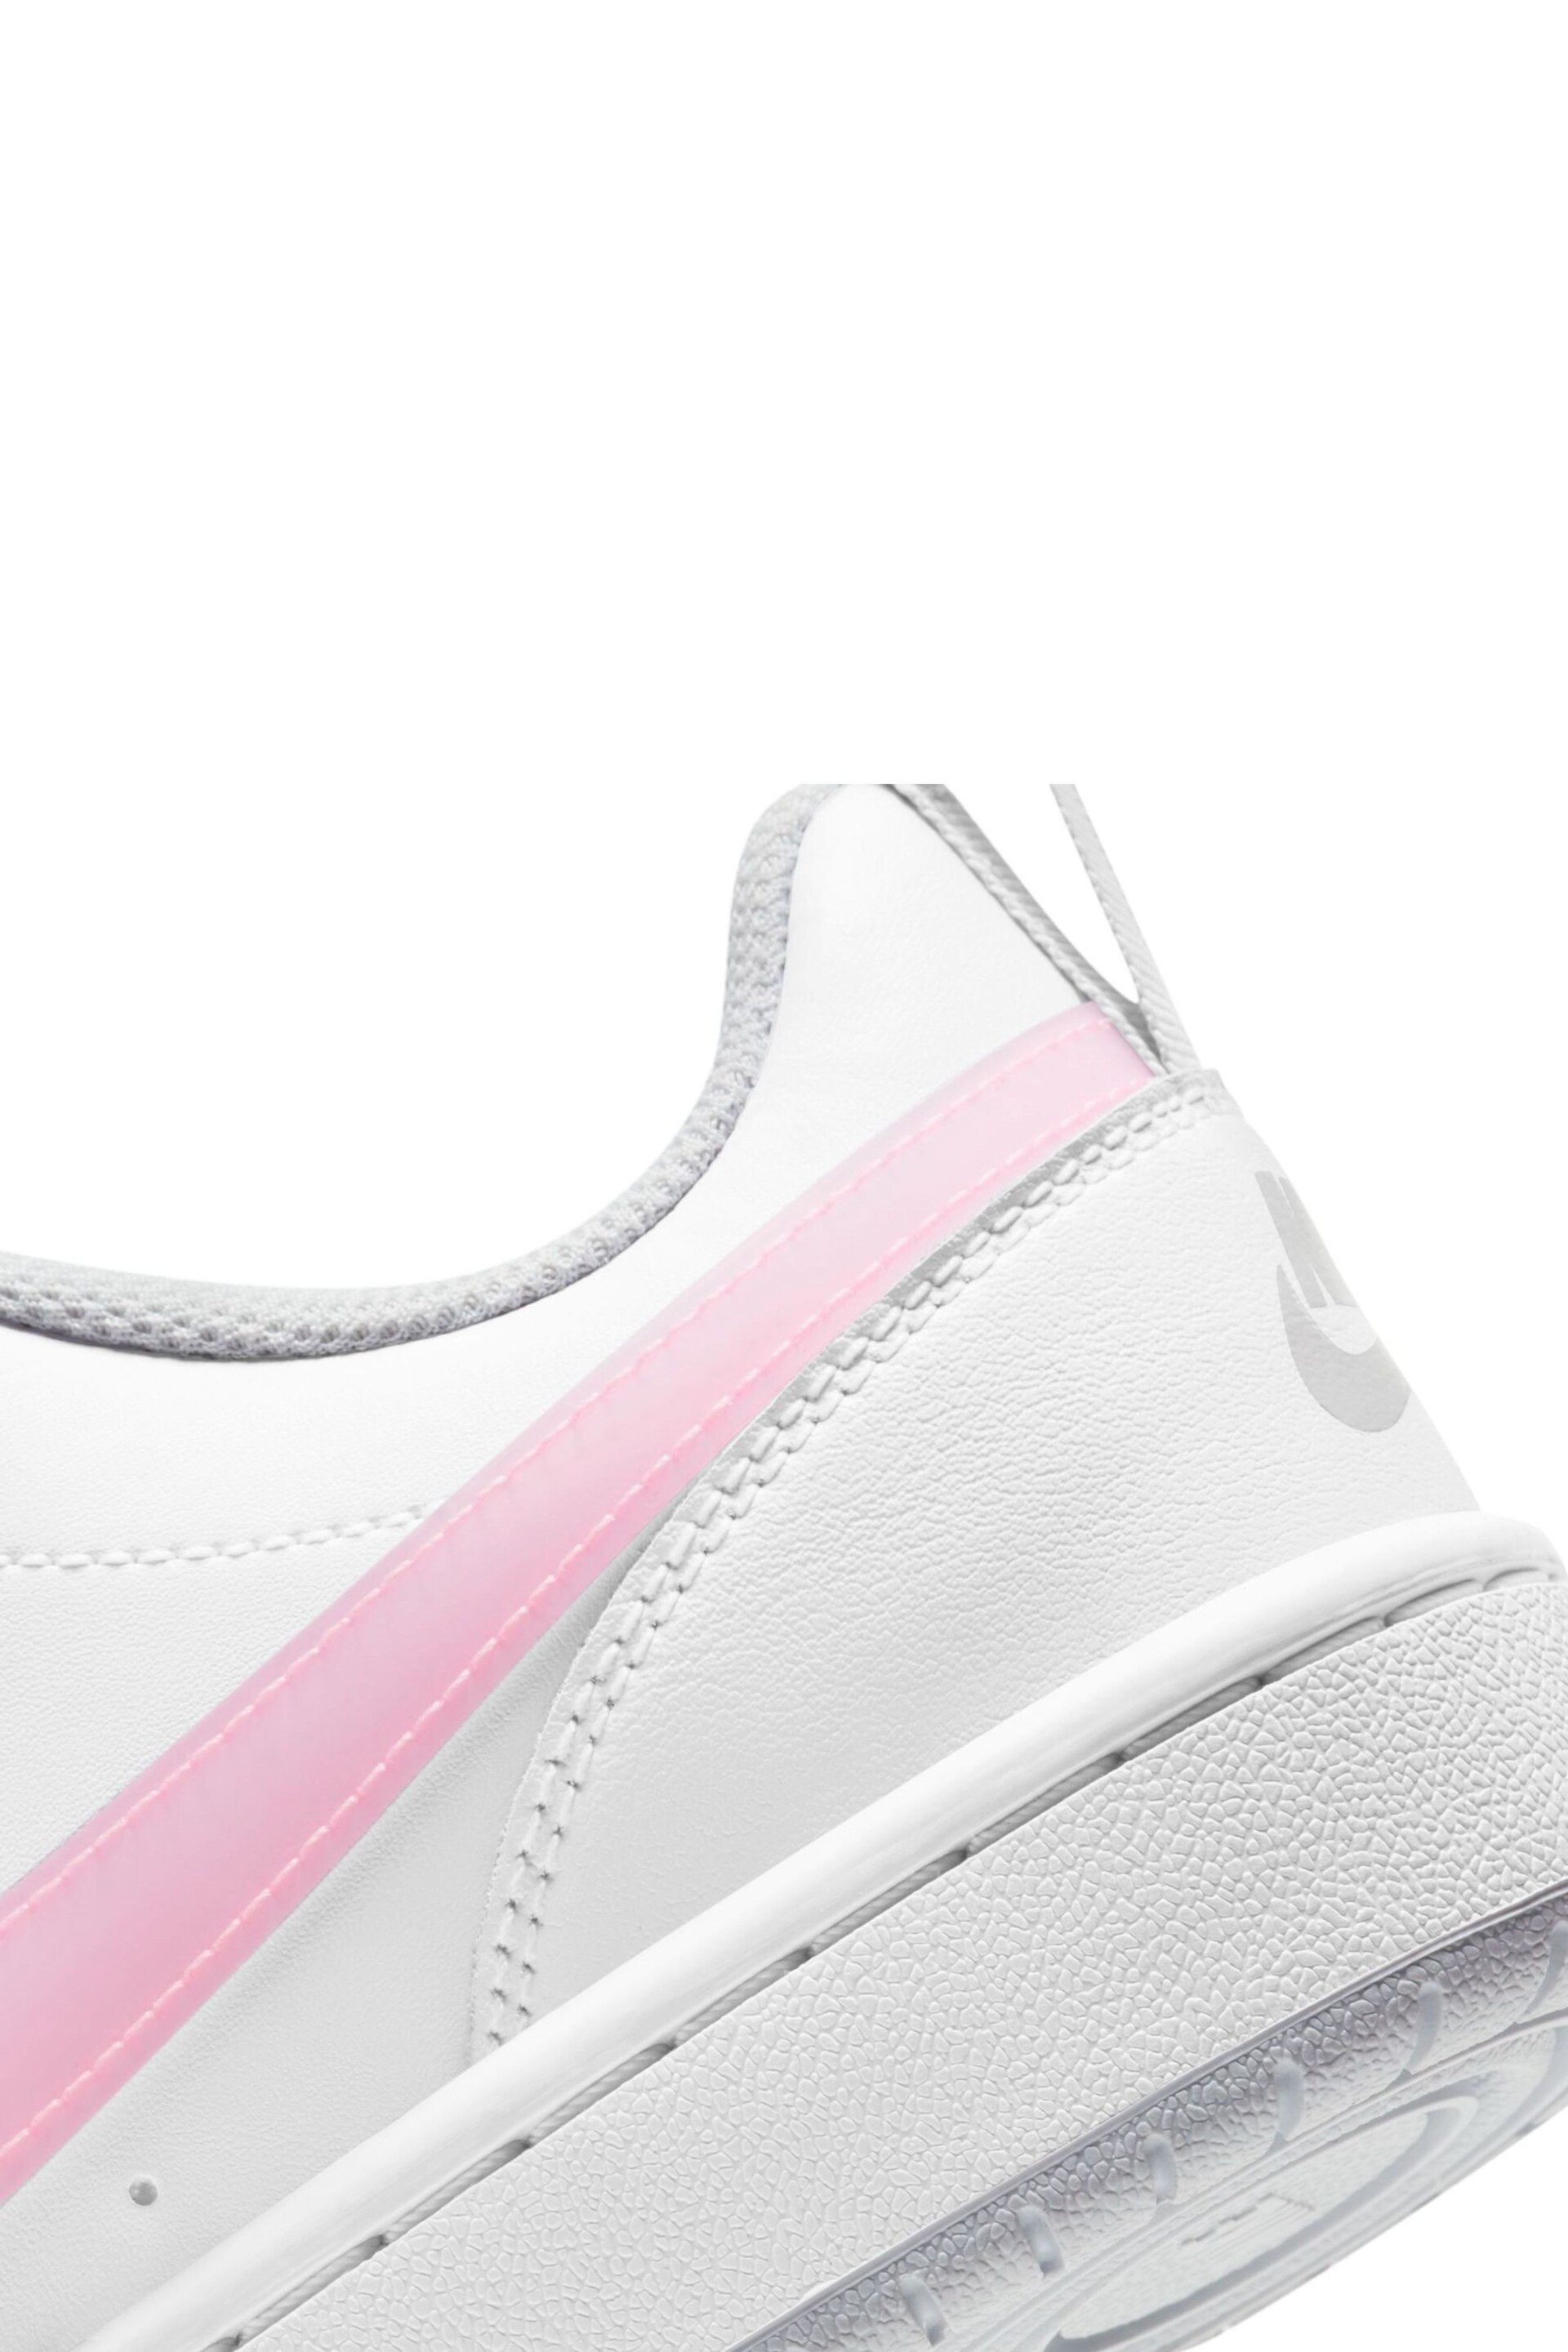 Nike White/Pink Court Borough Low Youth Trainers - Image 8 of 8